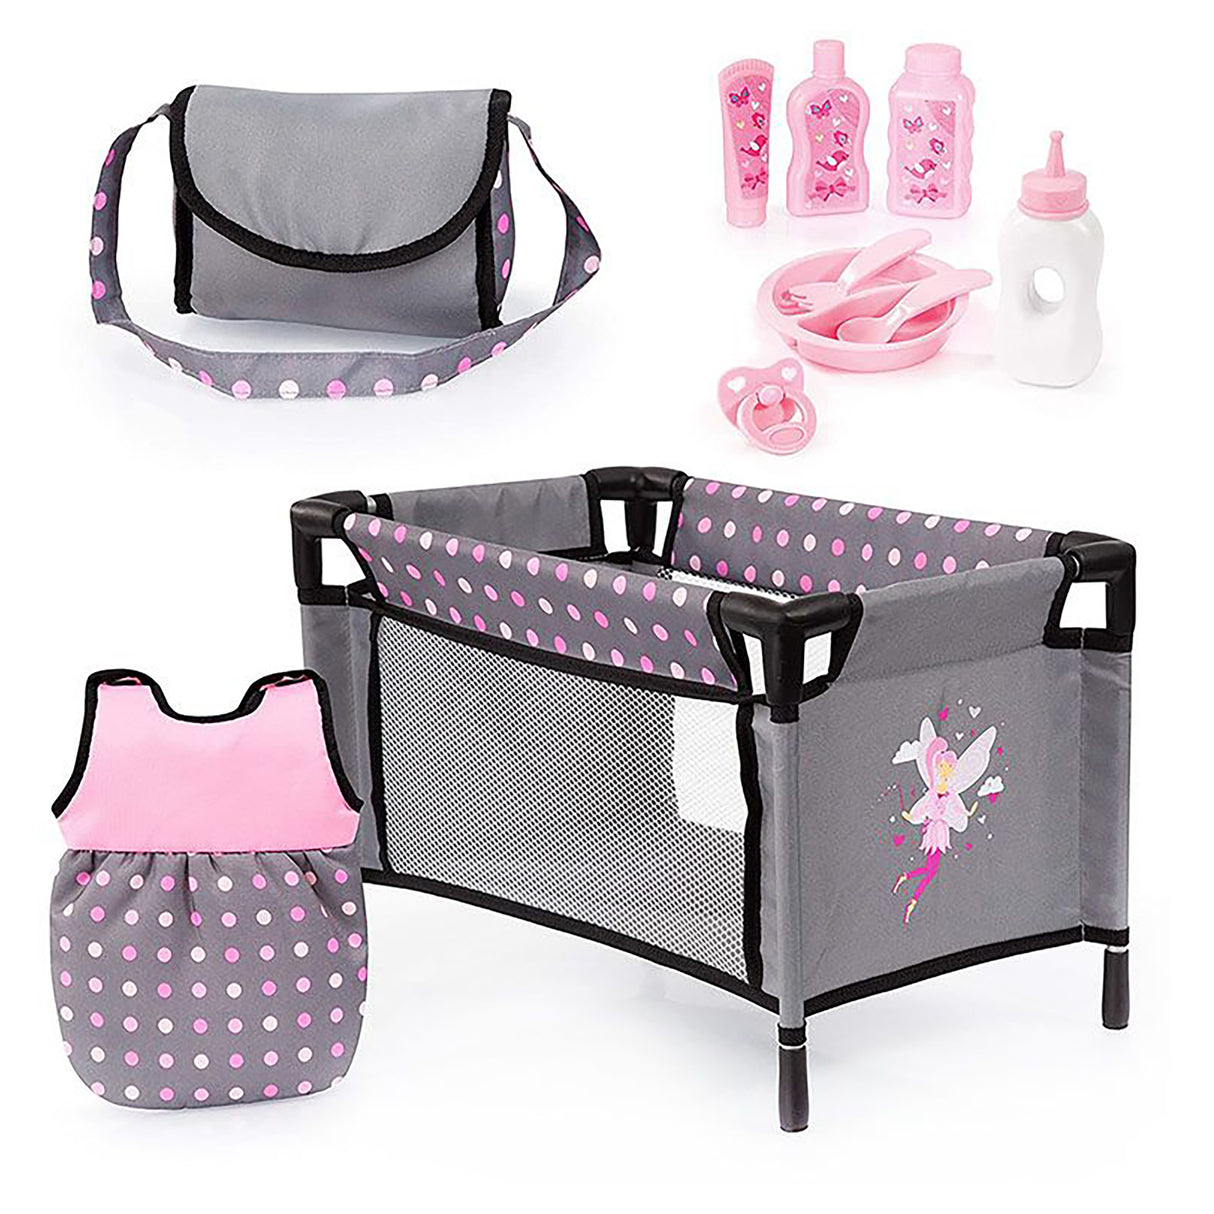 Bayer Doll Travel Bed + Accessory